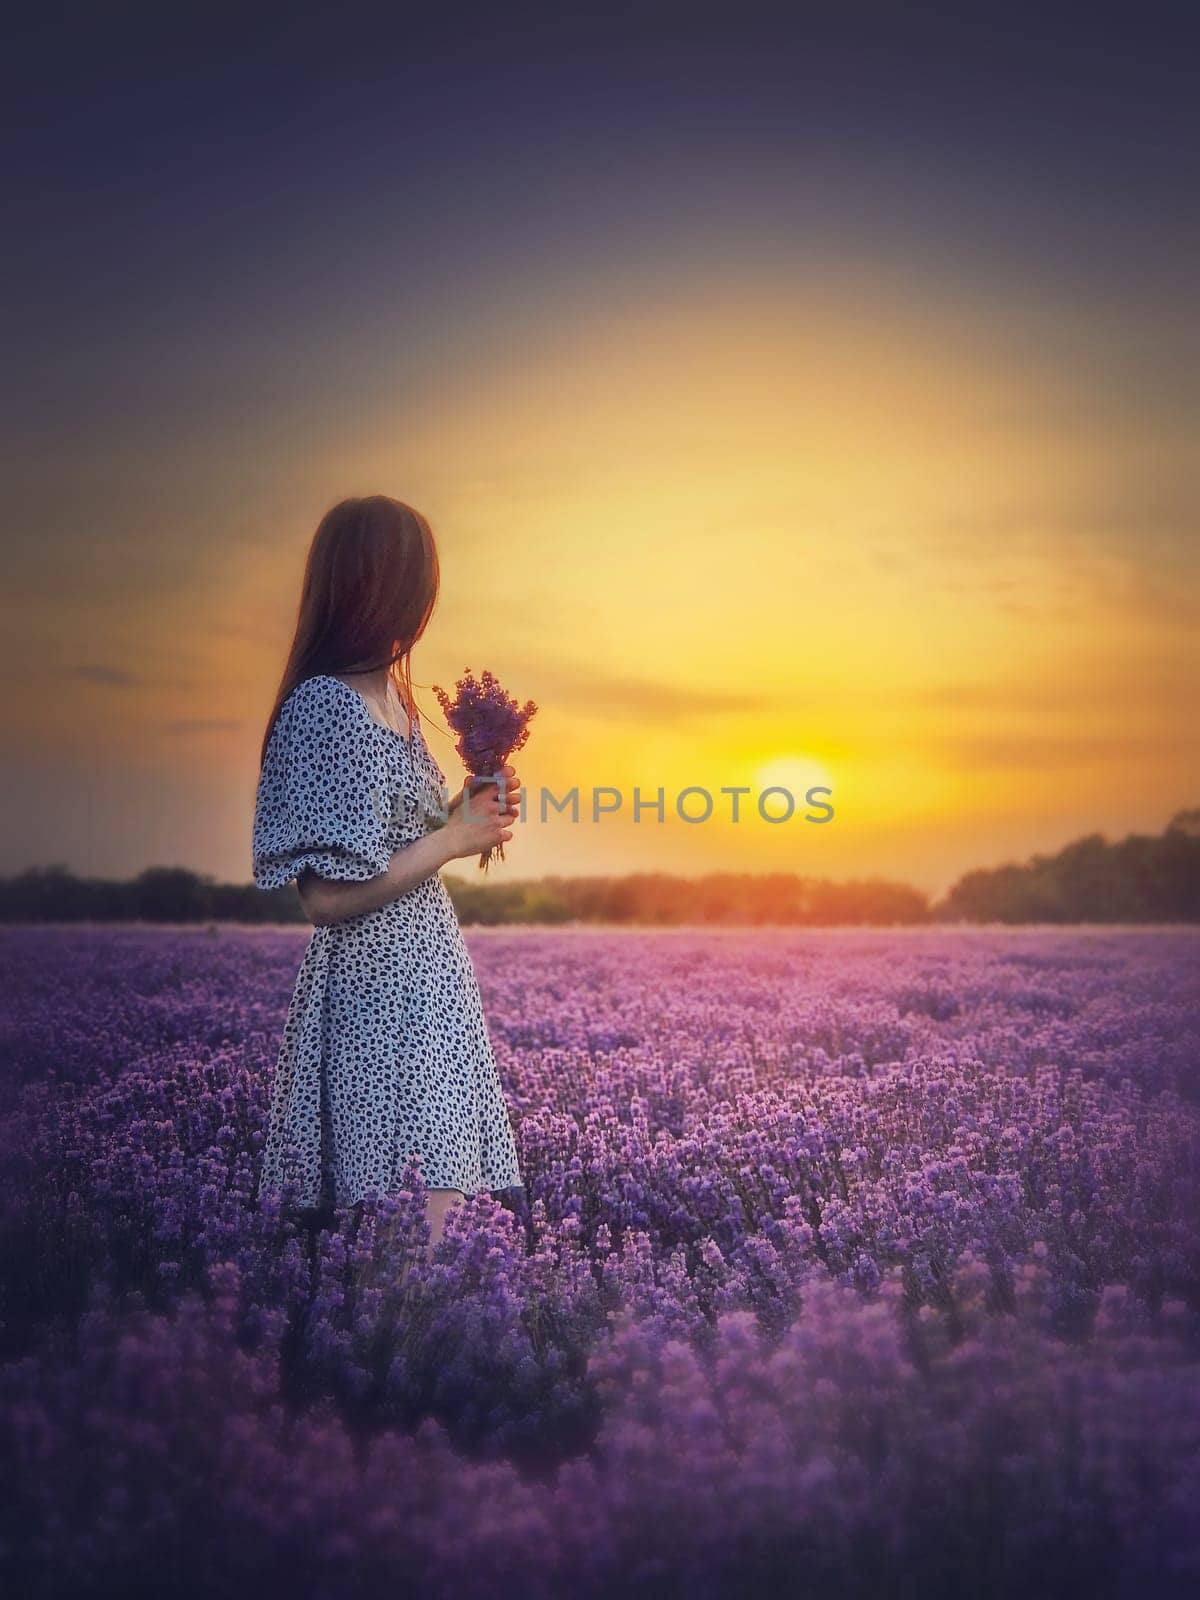 Side portrait of a young woman in dress stands in the purple lavender field looking at the beautiful sunset sky. Natural summer dusk scene by psychoshadow